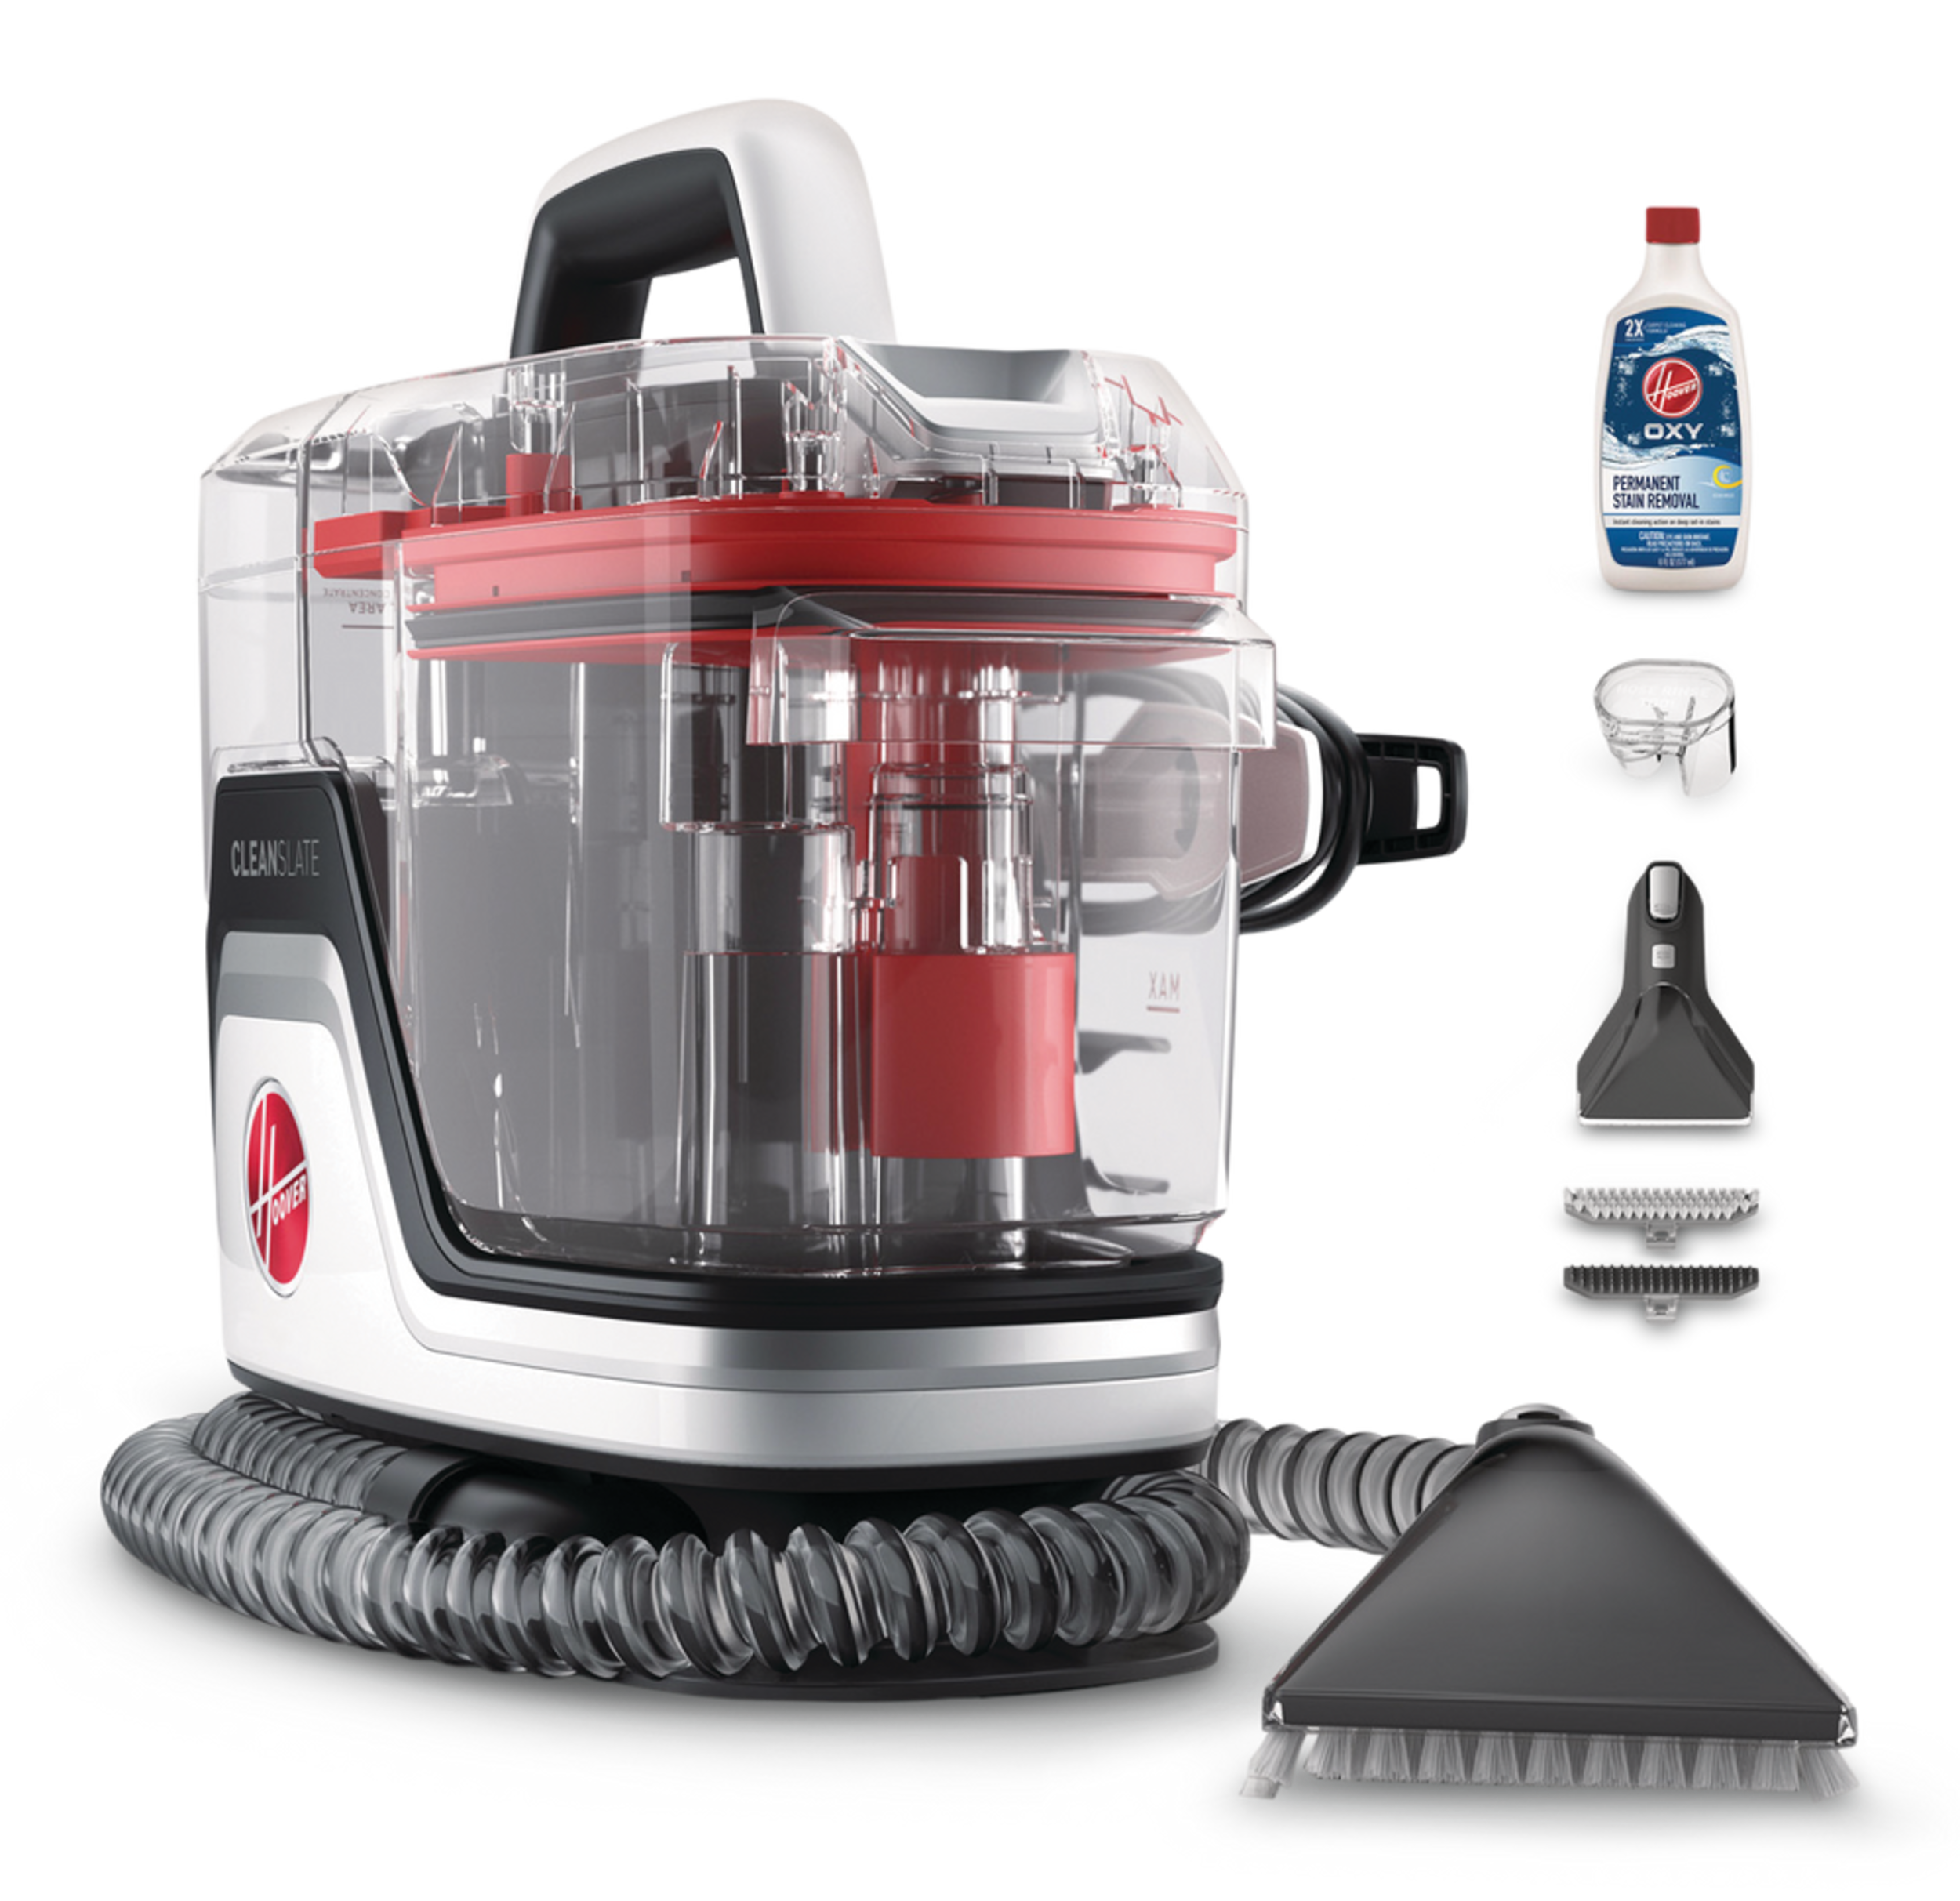 Hoover FH14041CDI CleanSlate Pet Carpet & Upholstery Spot Deep Cleaner (Refurbished - 90 Days Warranty)